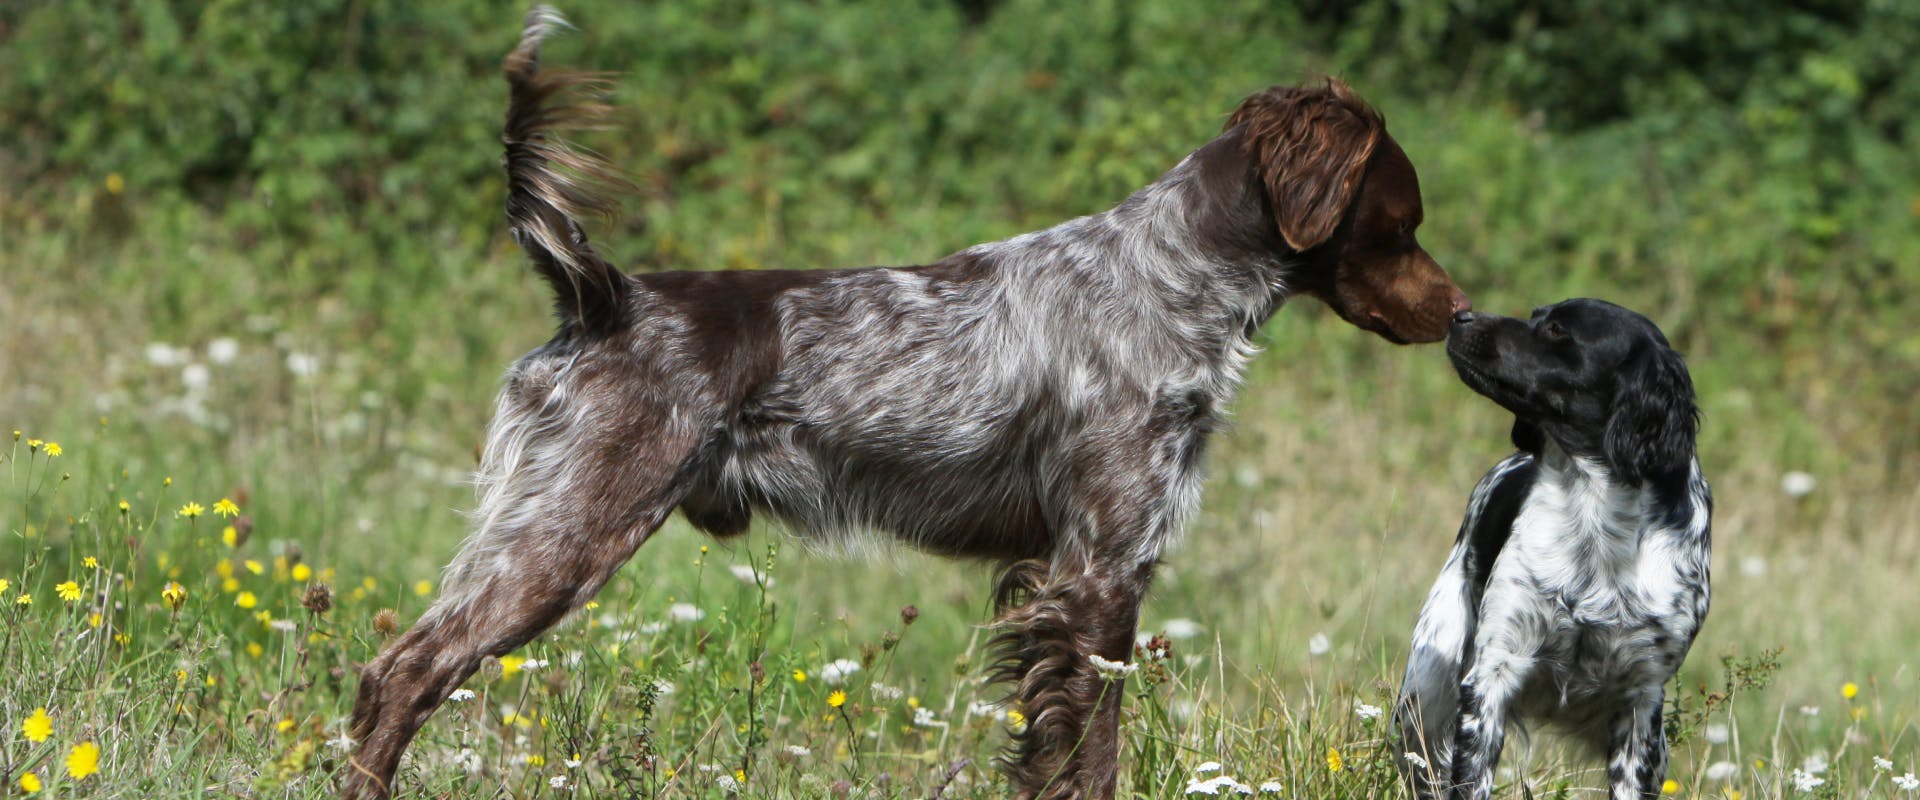 a brown spaniel and a black springer spaniel stood in a field touching noses